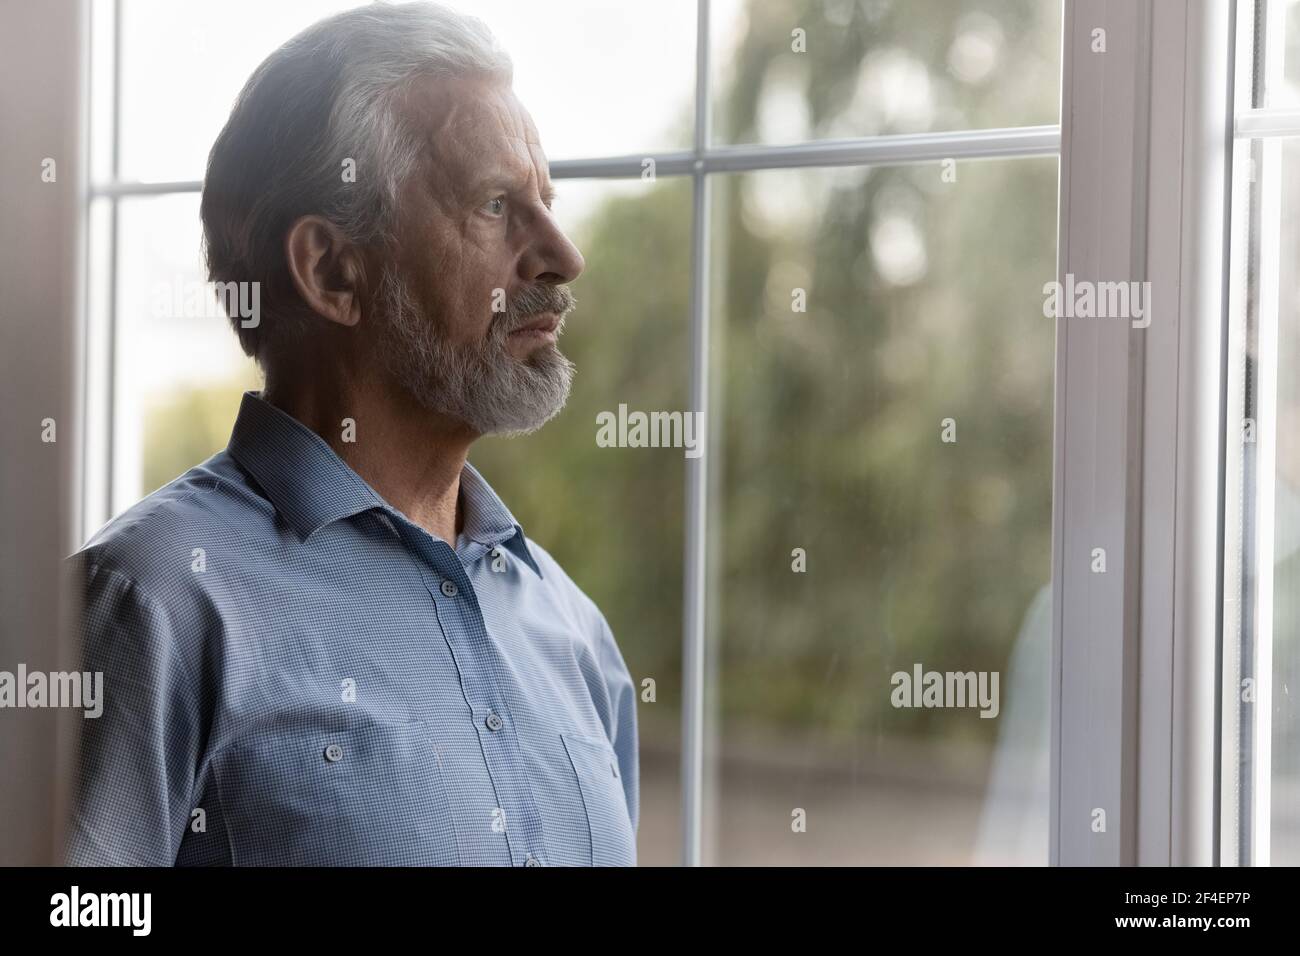 Unhappy elderly man look in distance missing Stock Photo